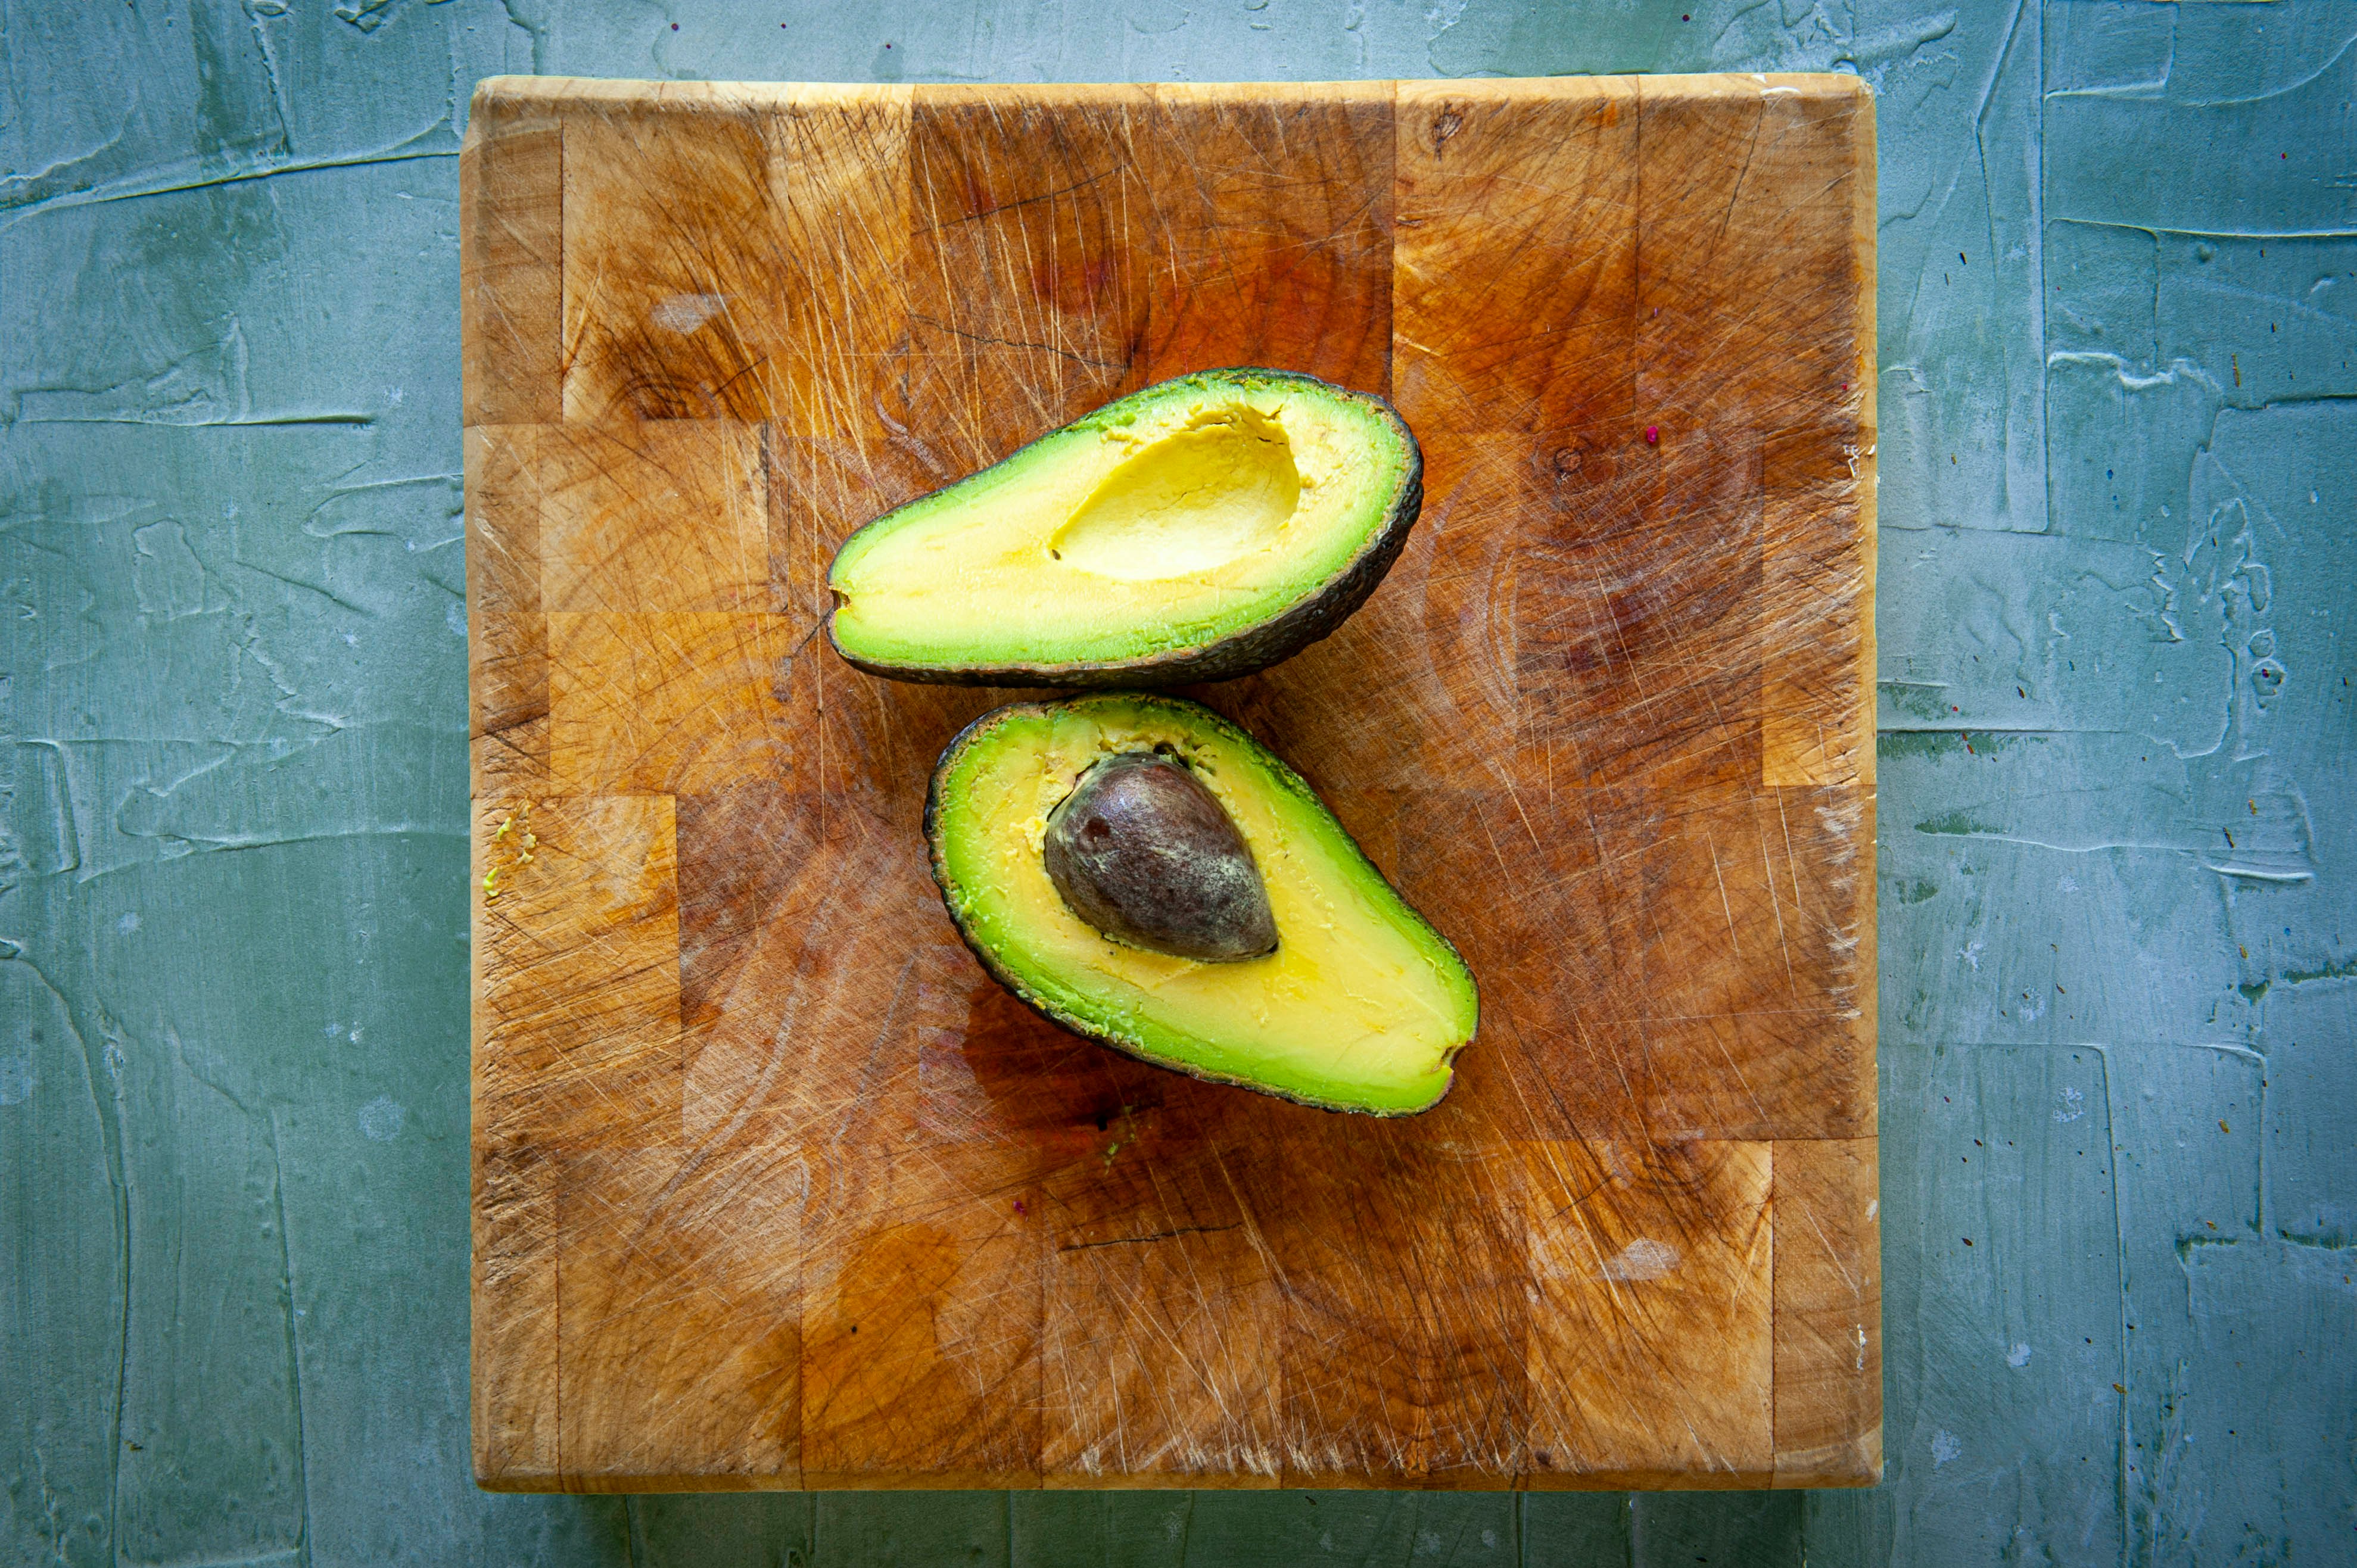 Not sure how to keep your avocados fresh? The FDA says one storage hack could dangerous.